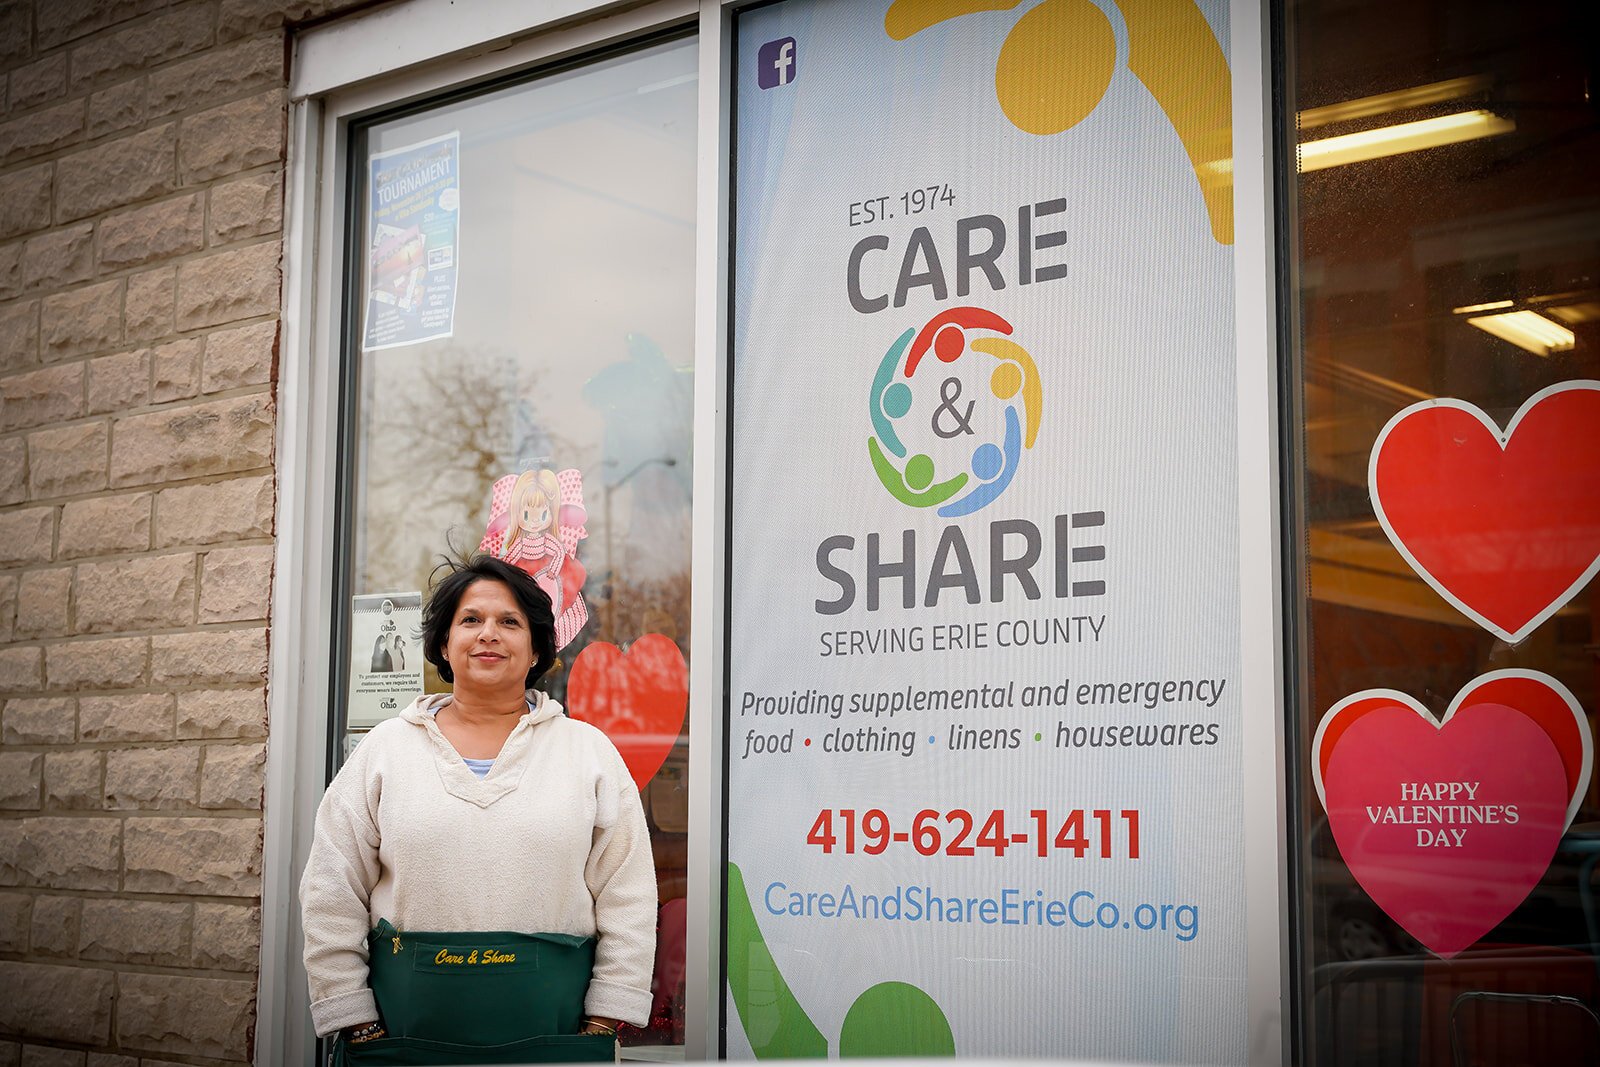 Anita Kromer, Executive Director of Care & Share of Erie County.